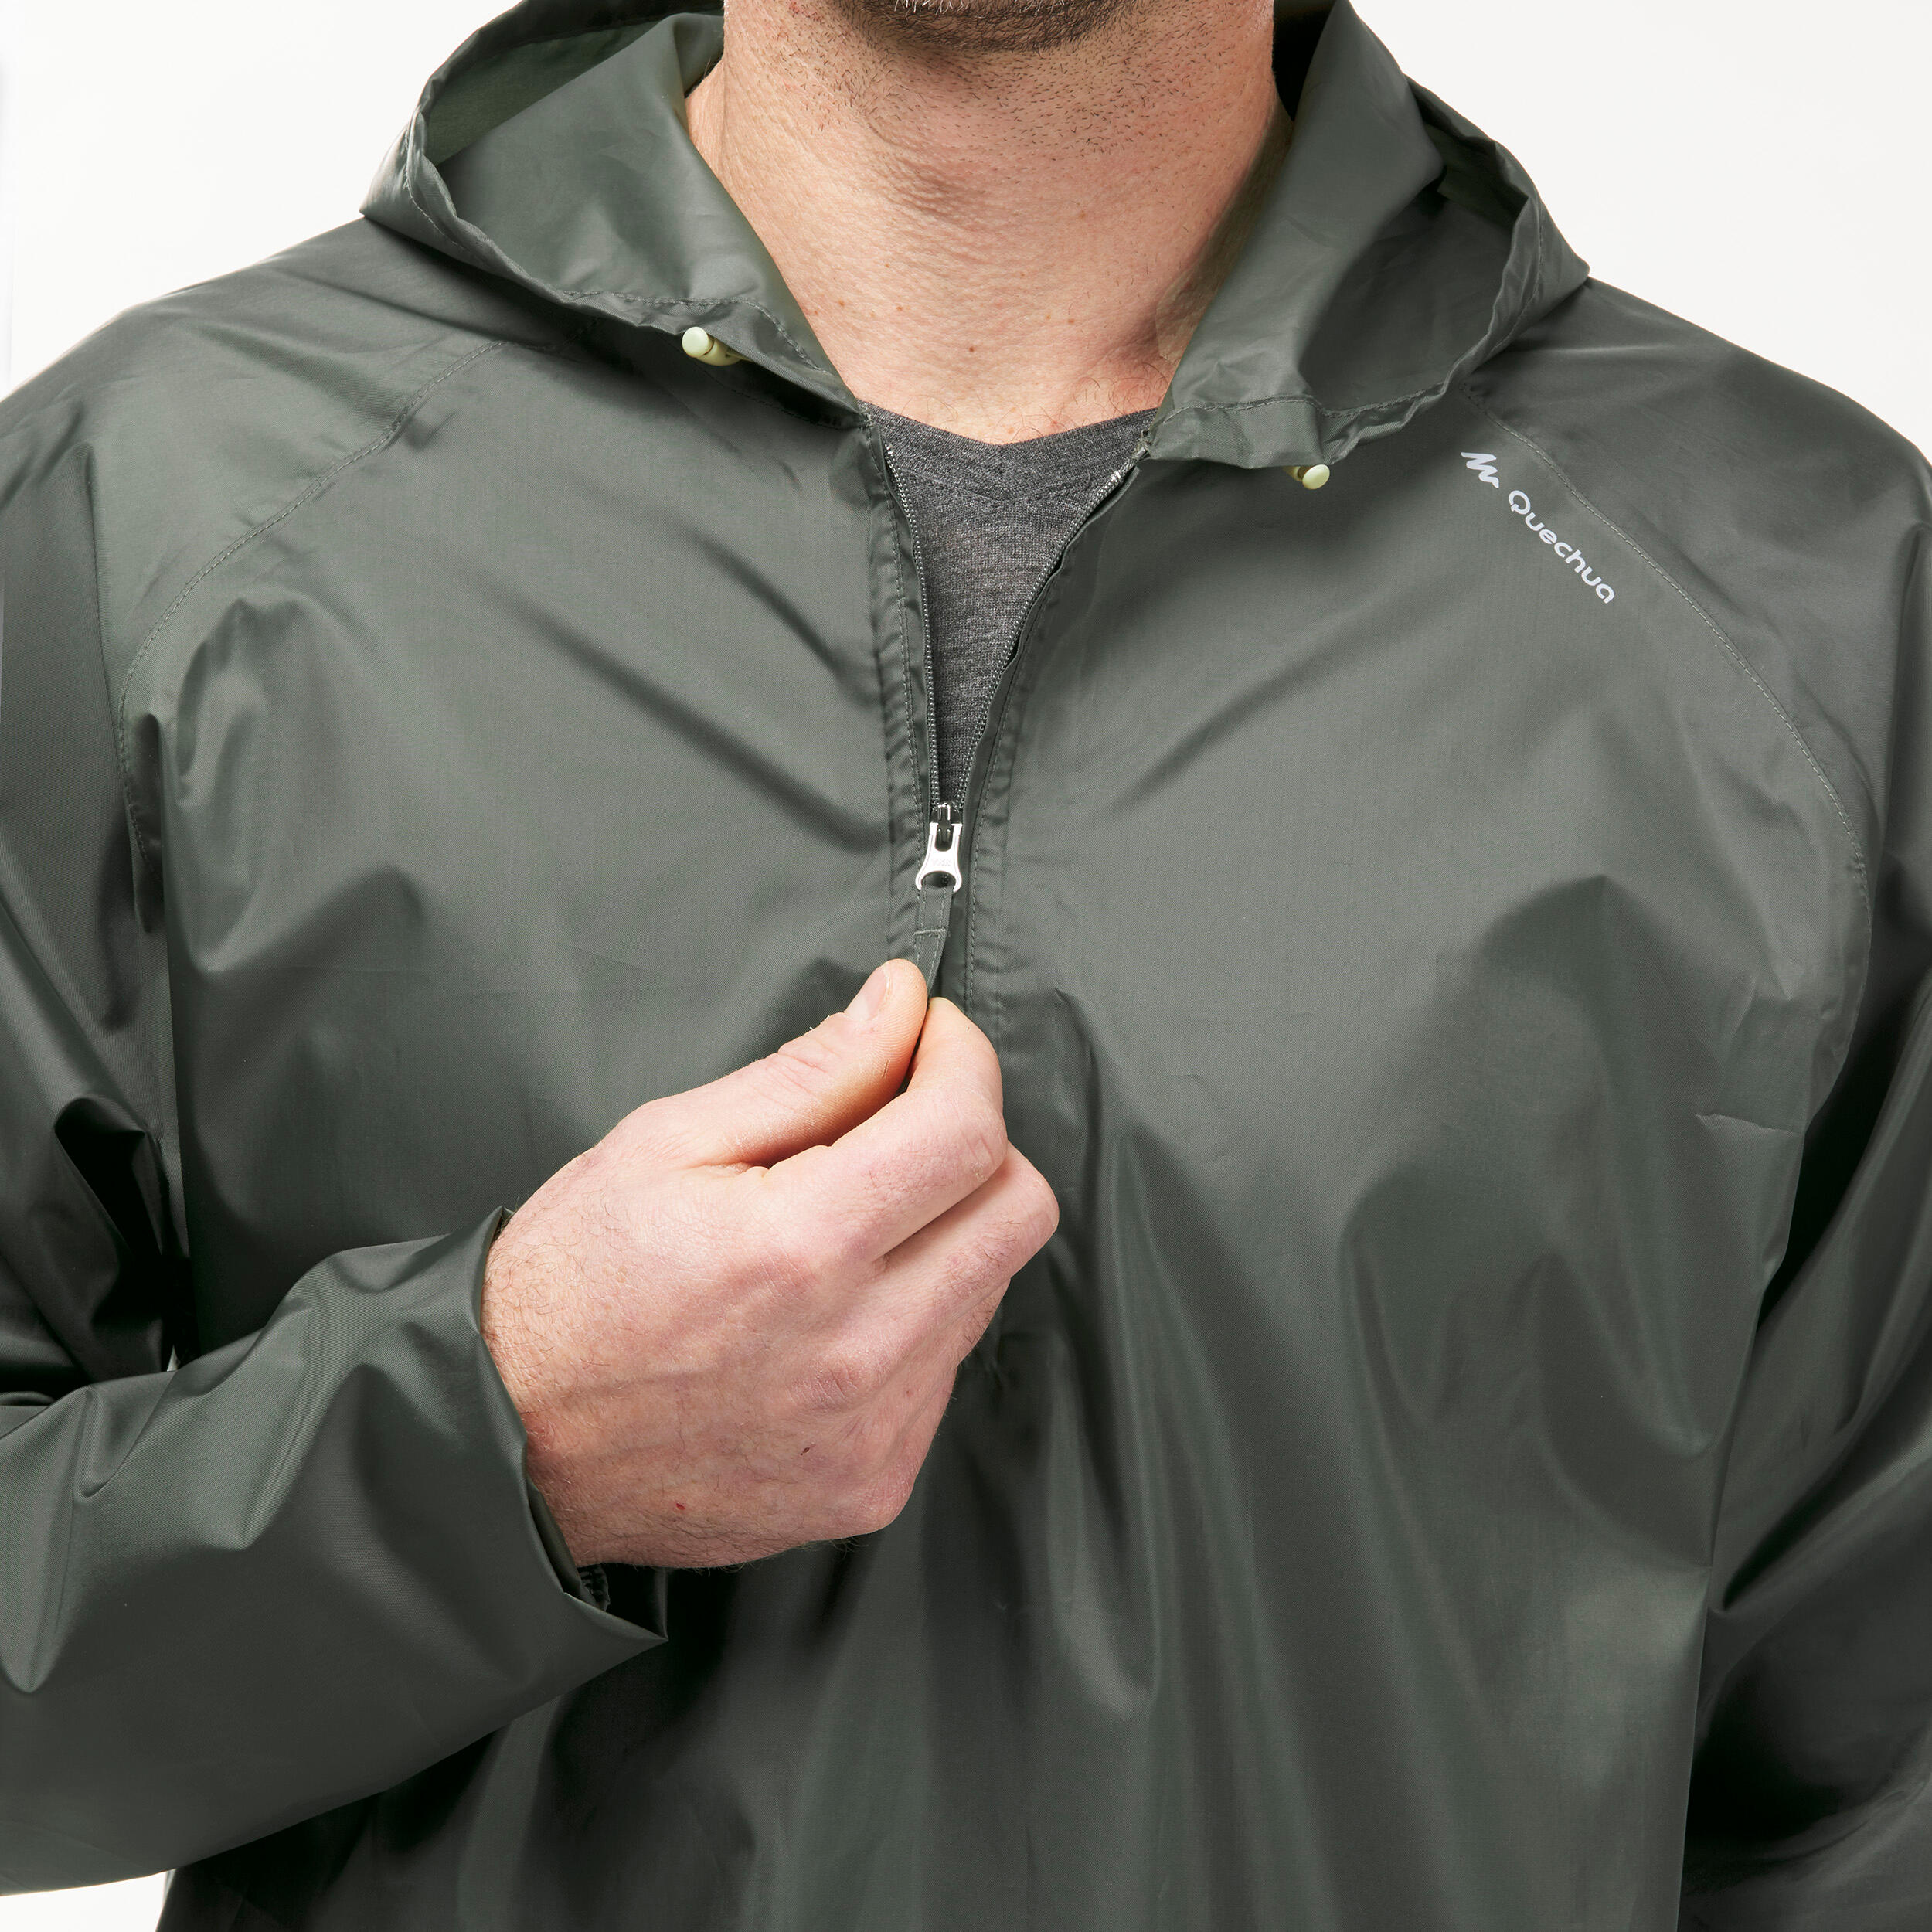 Mens Conjoined Raincoat Coverall Hat For Work Safety And Biking Chubasquero  Hombre Decathlon Jackets For Men From Darlingg, $5.93